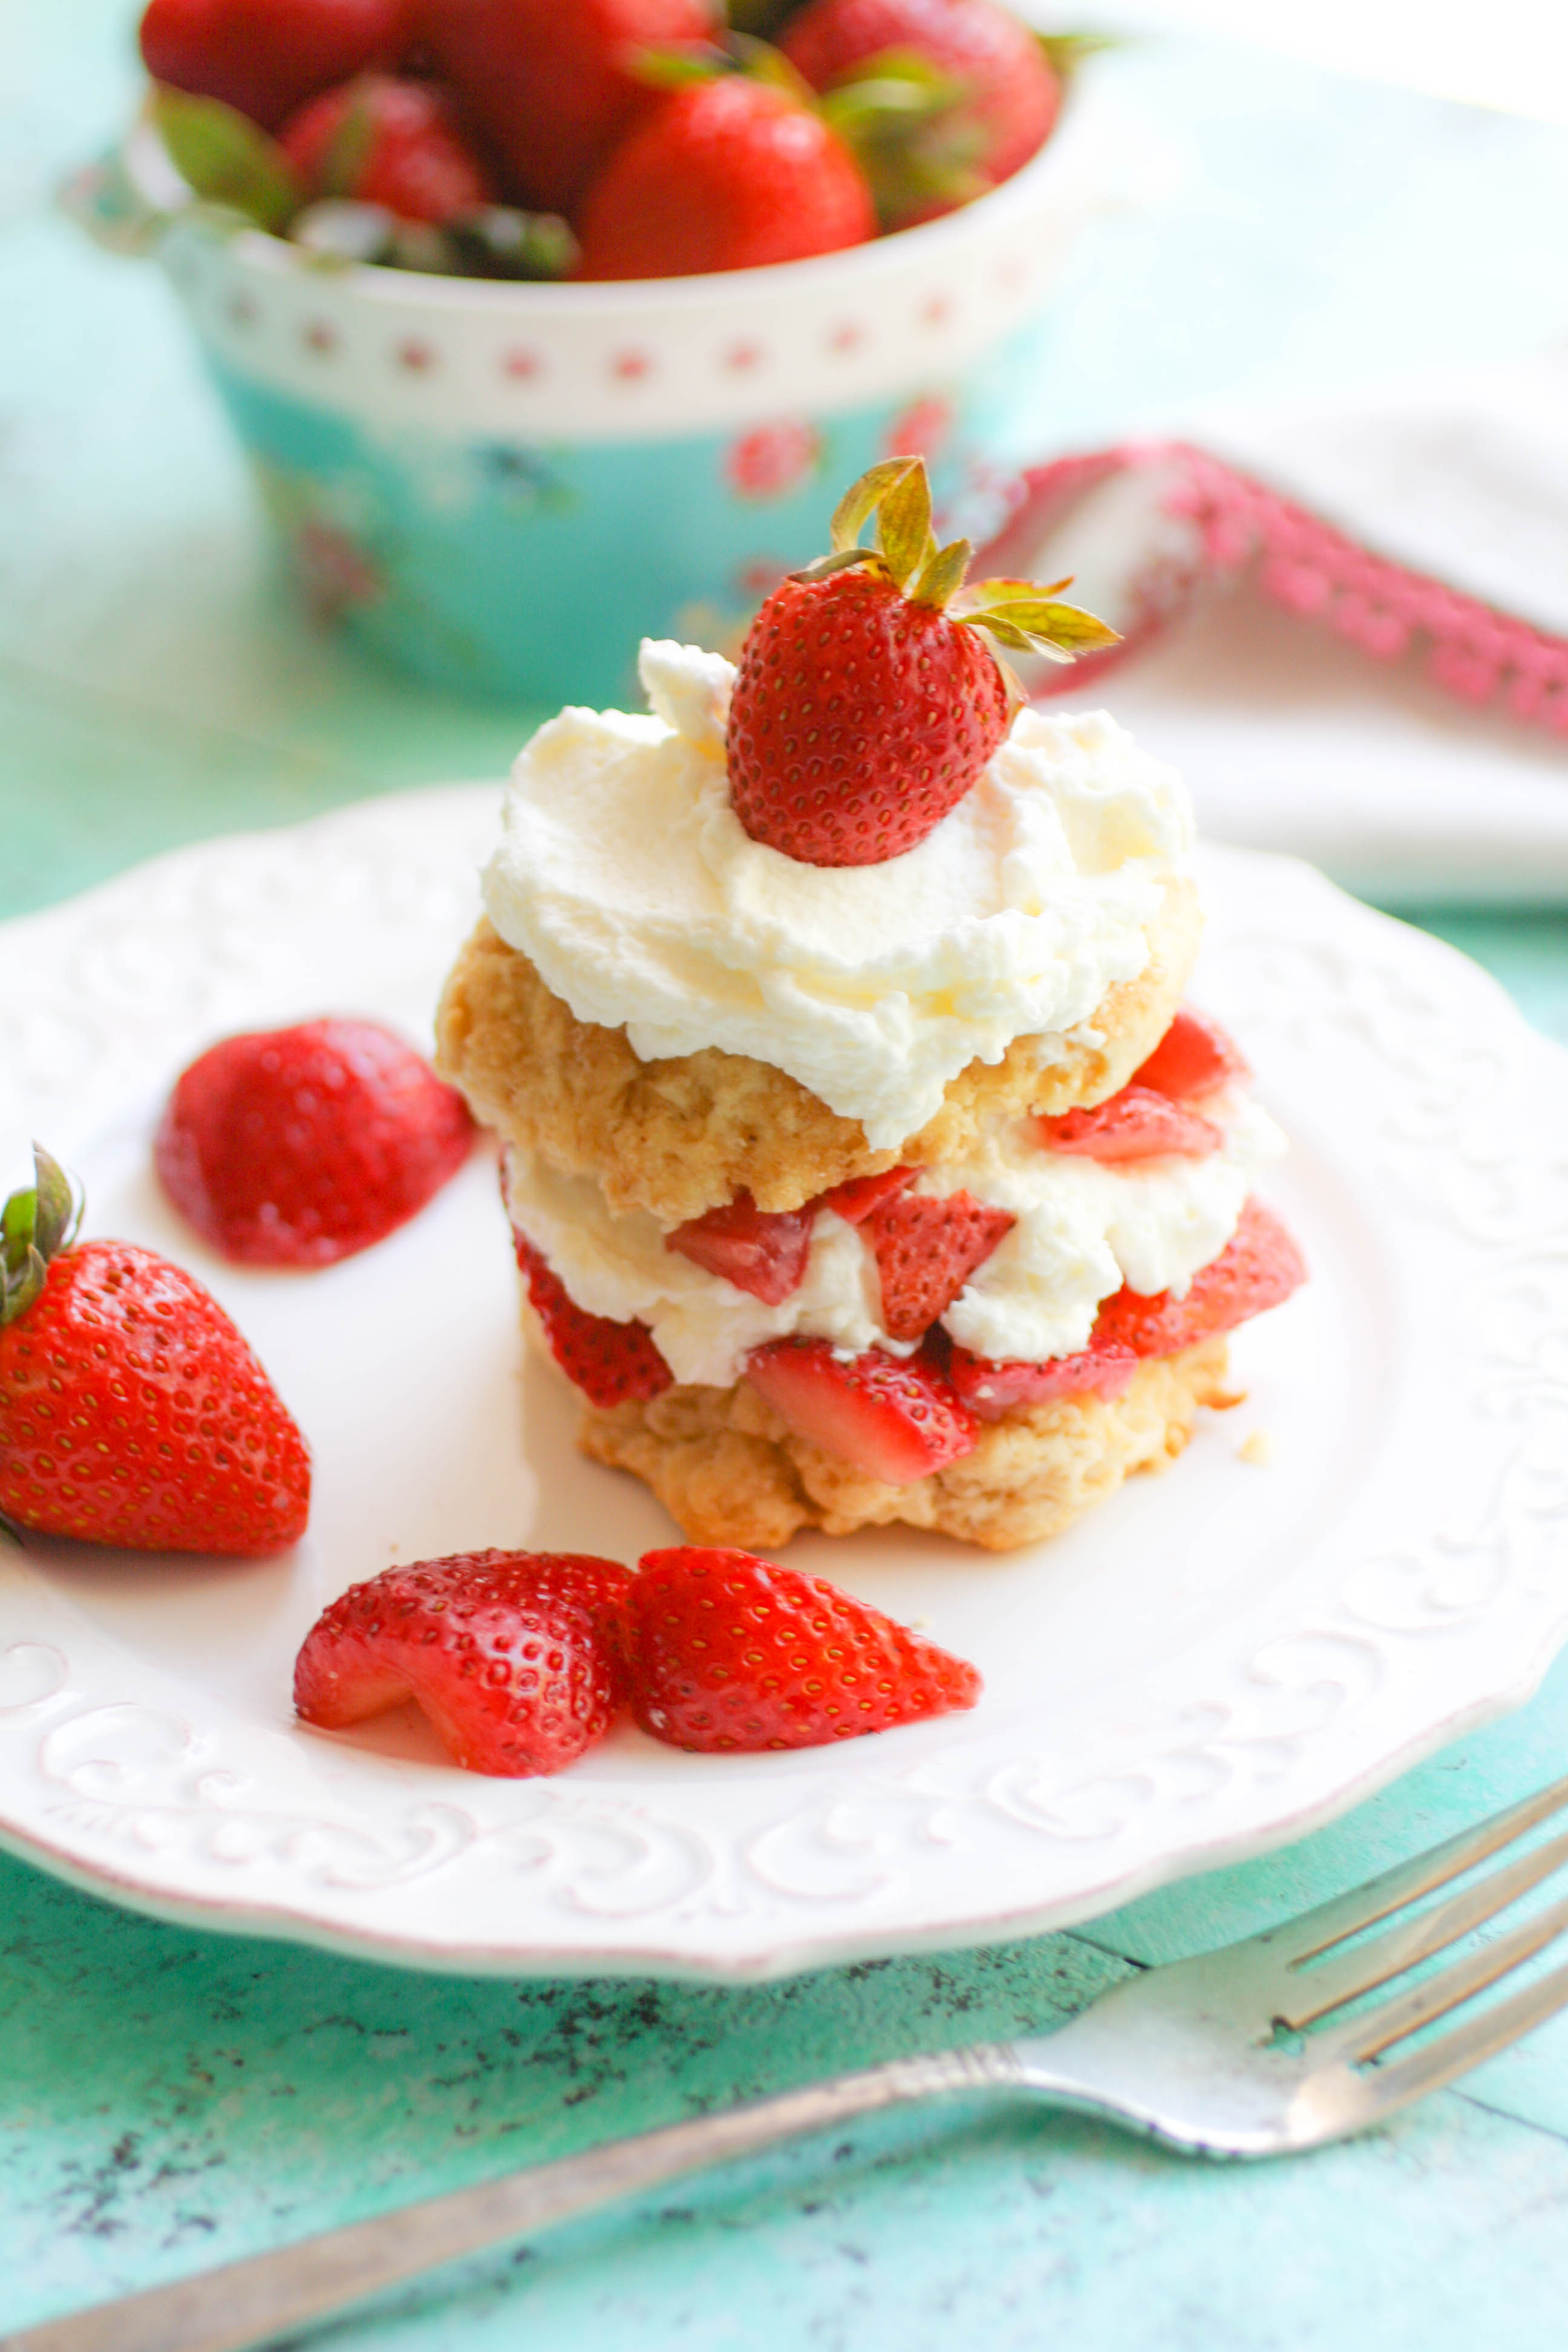 Ginger-Strawberry Shortcakes with Whipped Topping make a fabulous, classic dessert! Ginger-Strawberry Shortcakes with Whipped Topping are fun treats, for sure!